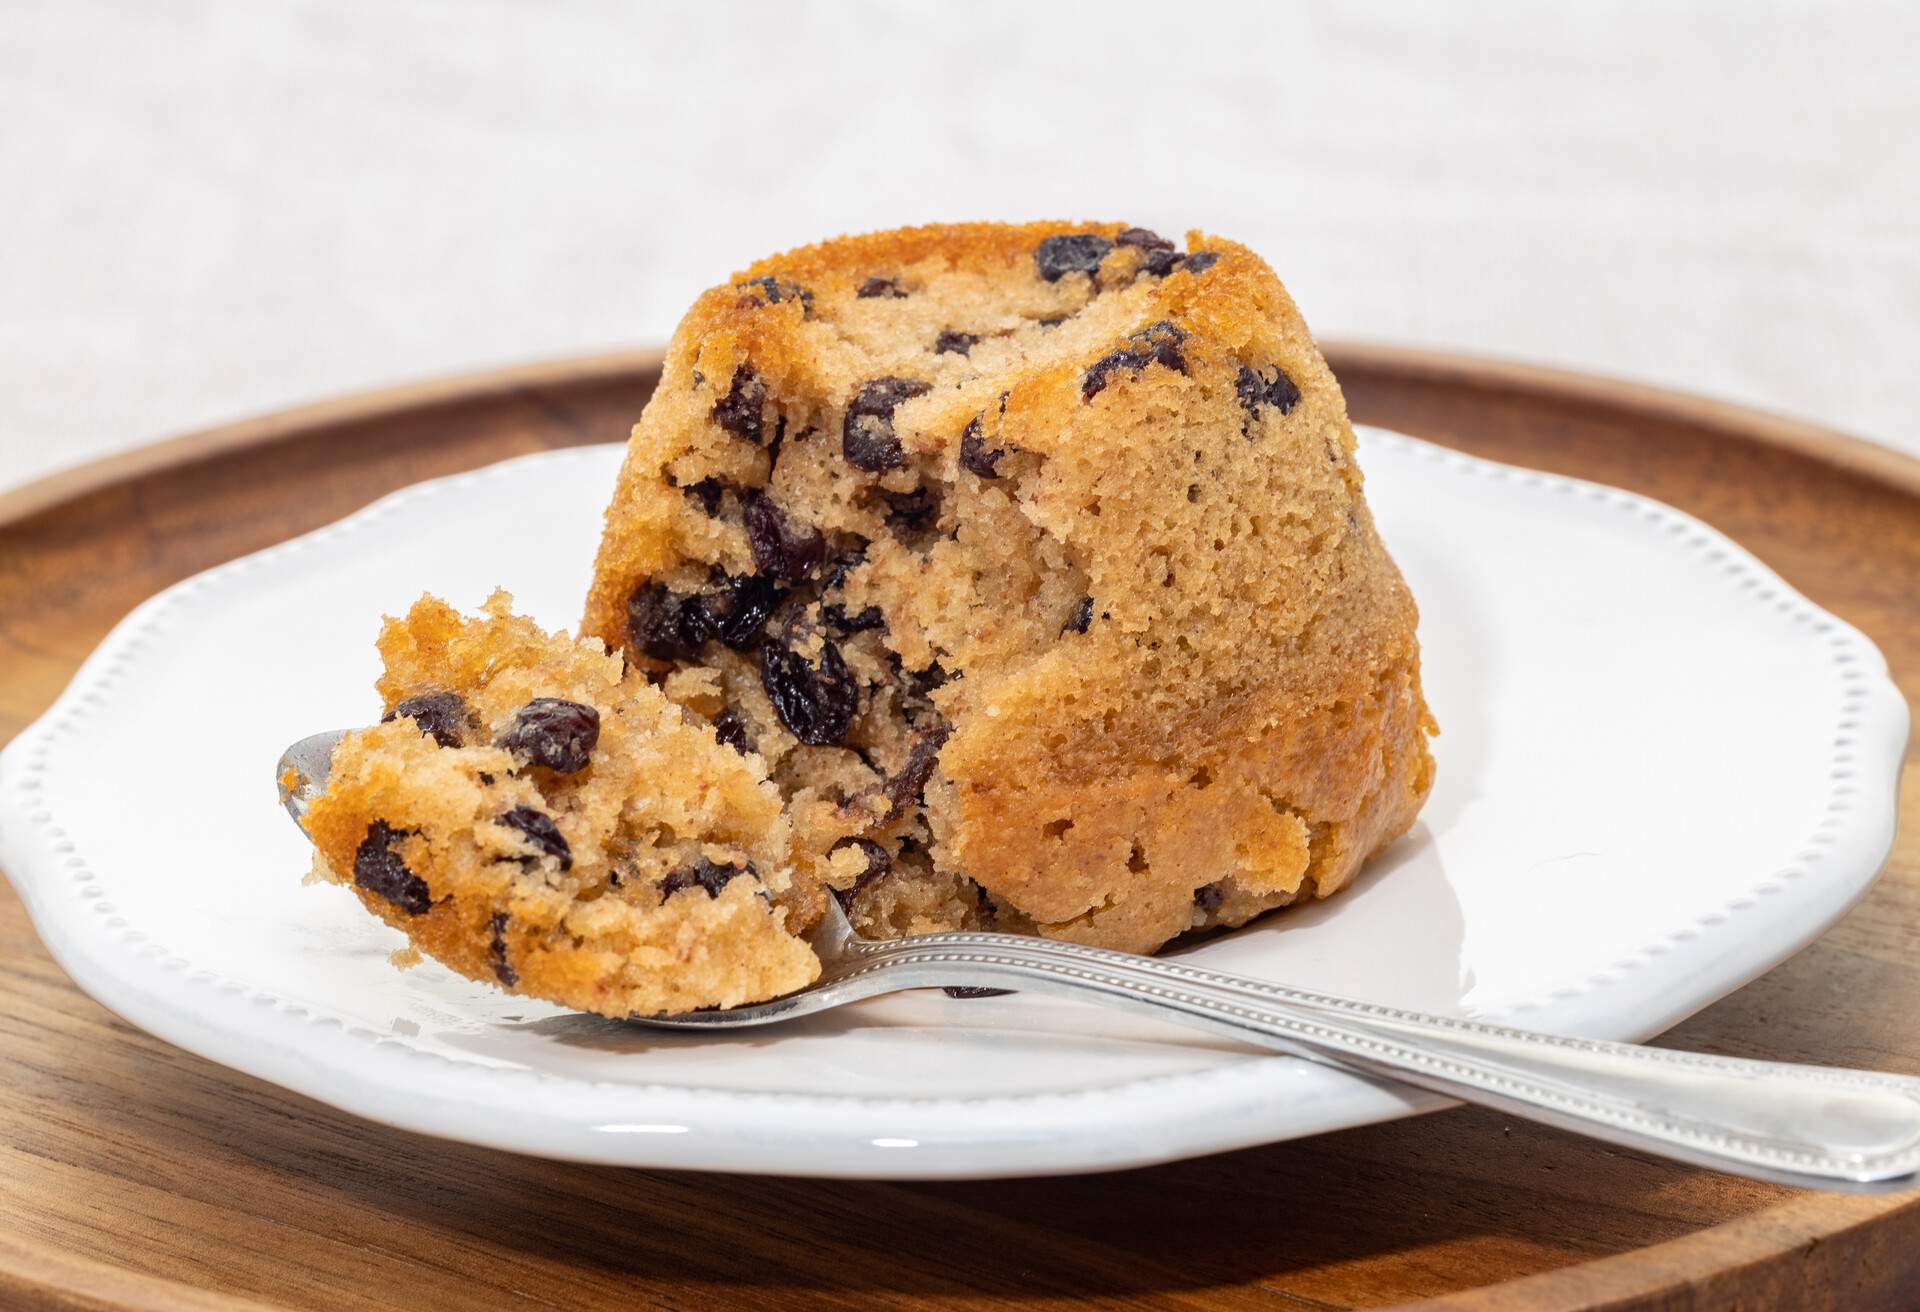 Classic British spotted dick pudding